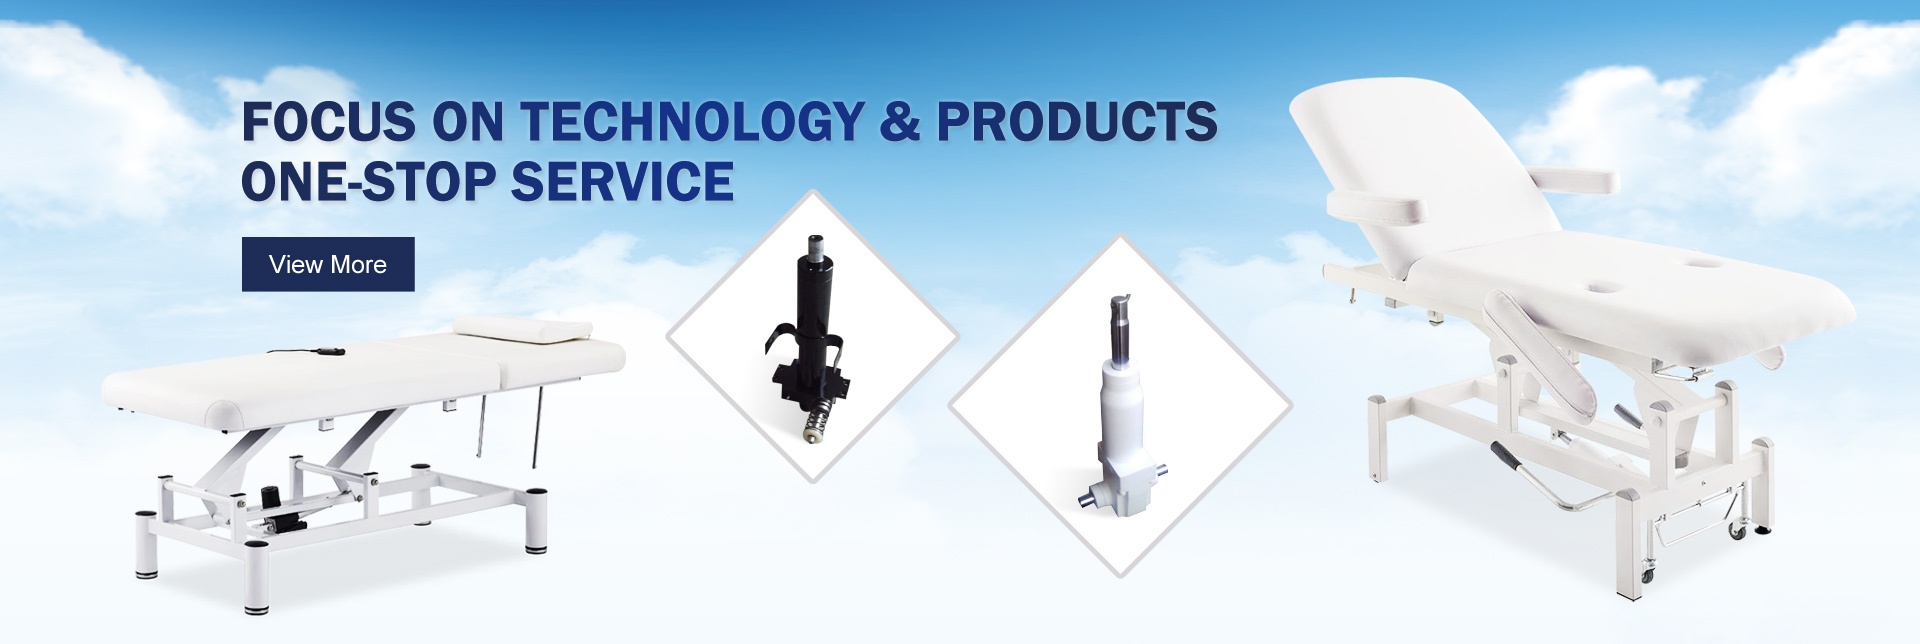 Focus on technology & products one-stop service